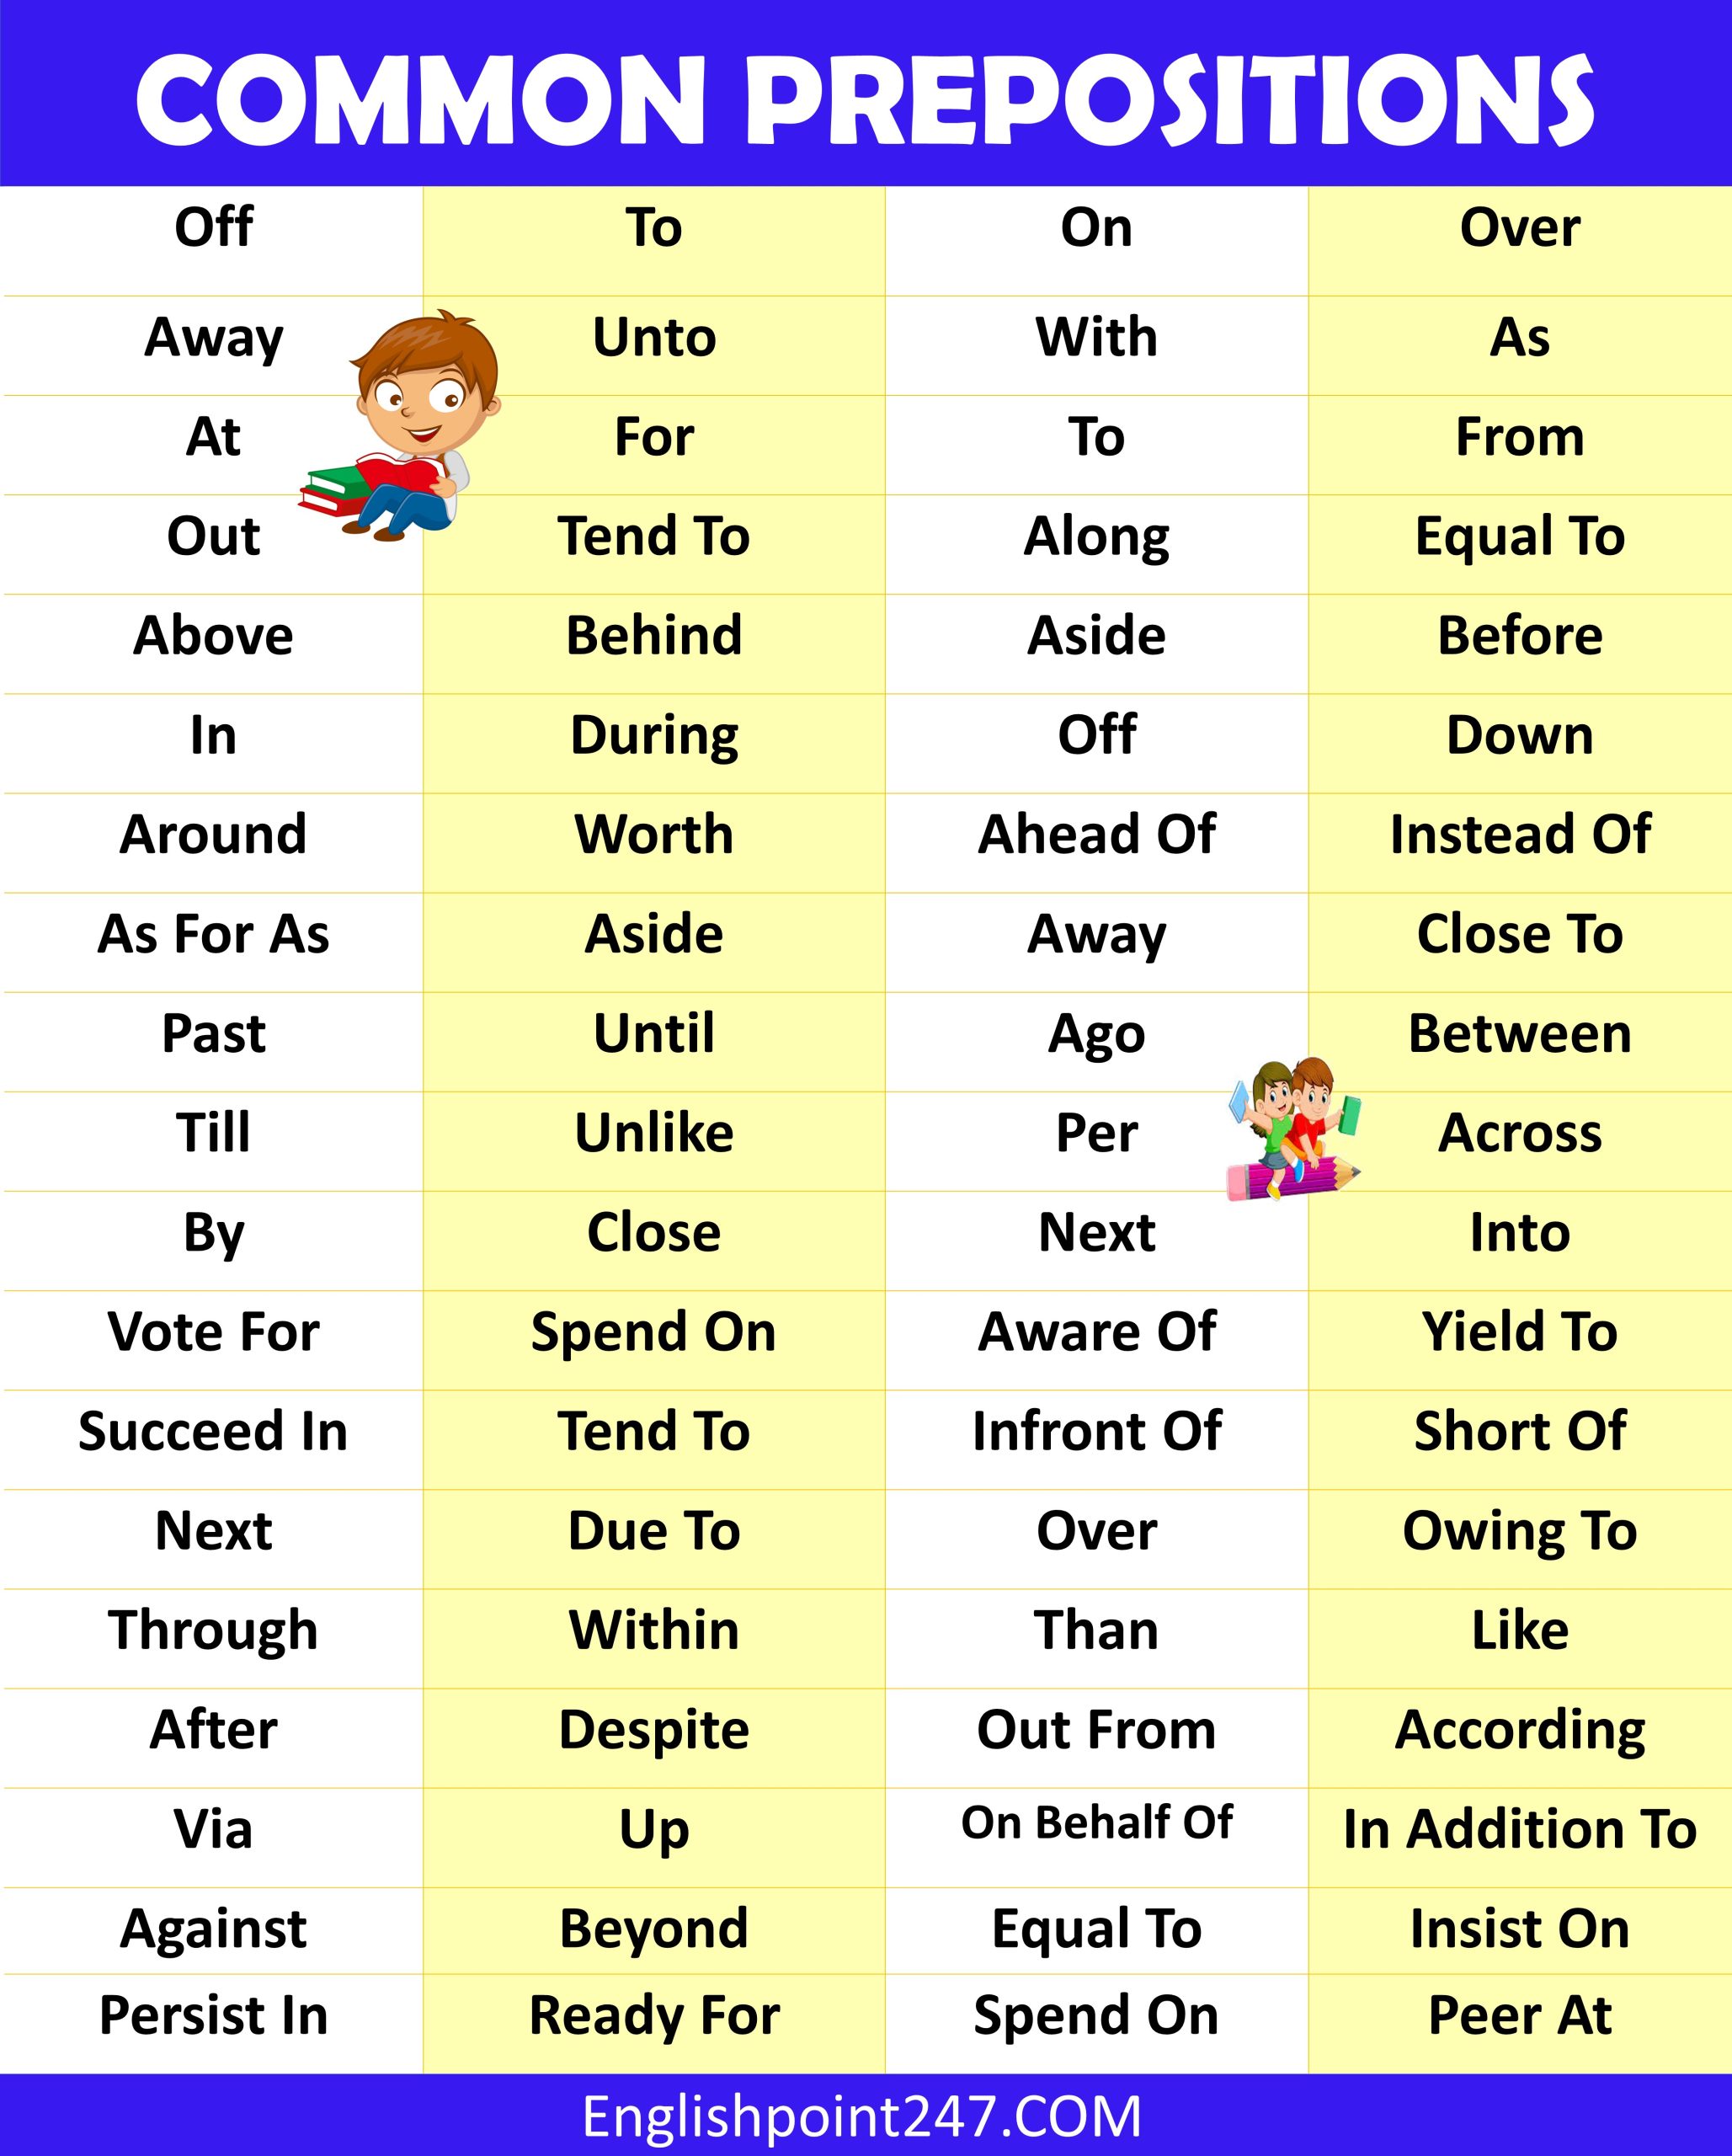 100 Commonly Used Prepositions with Examples in English Grammar